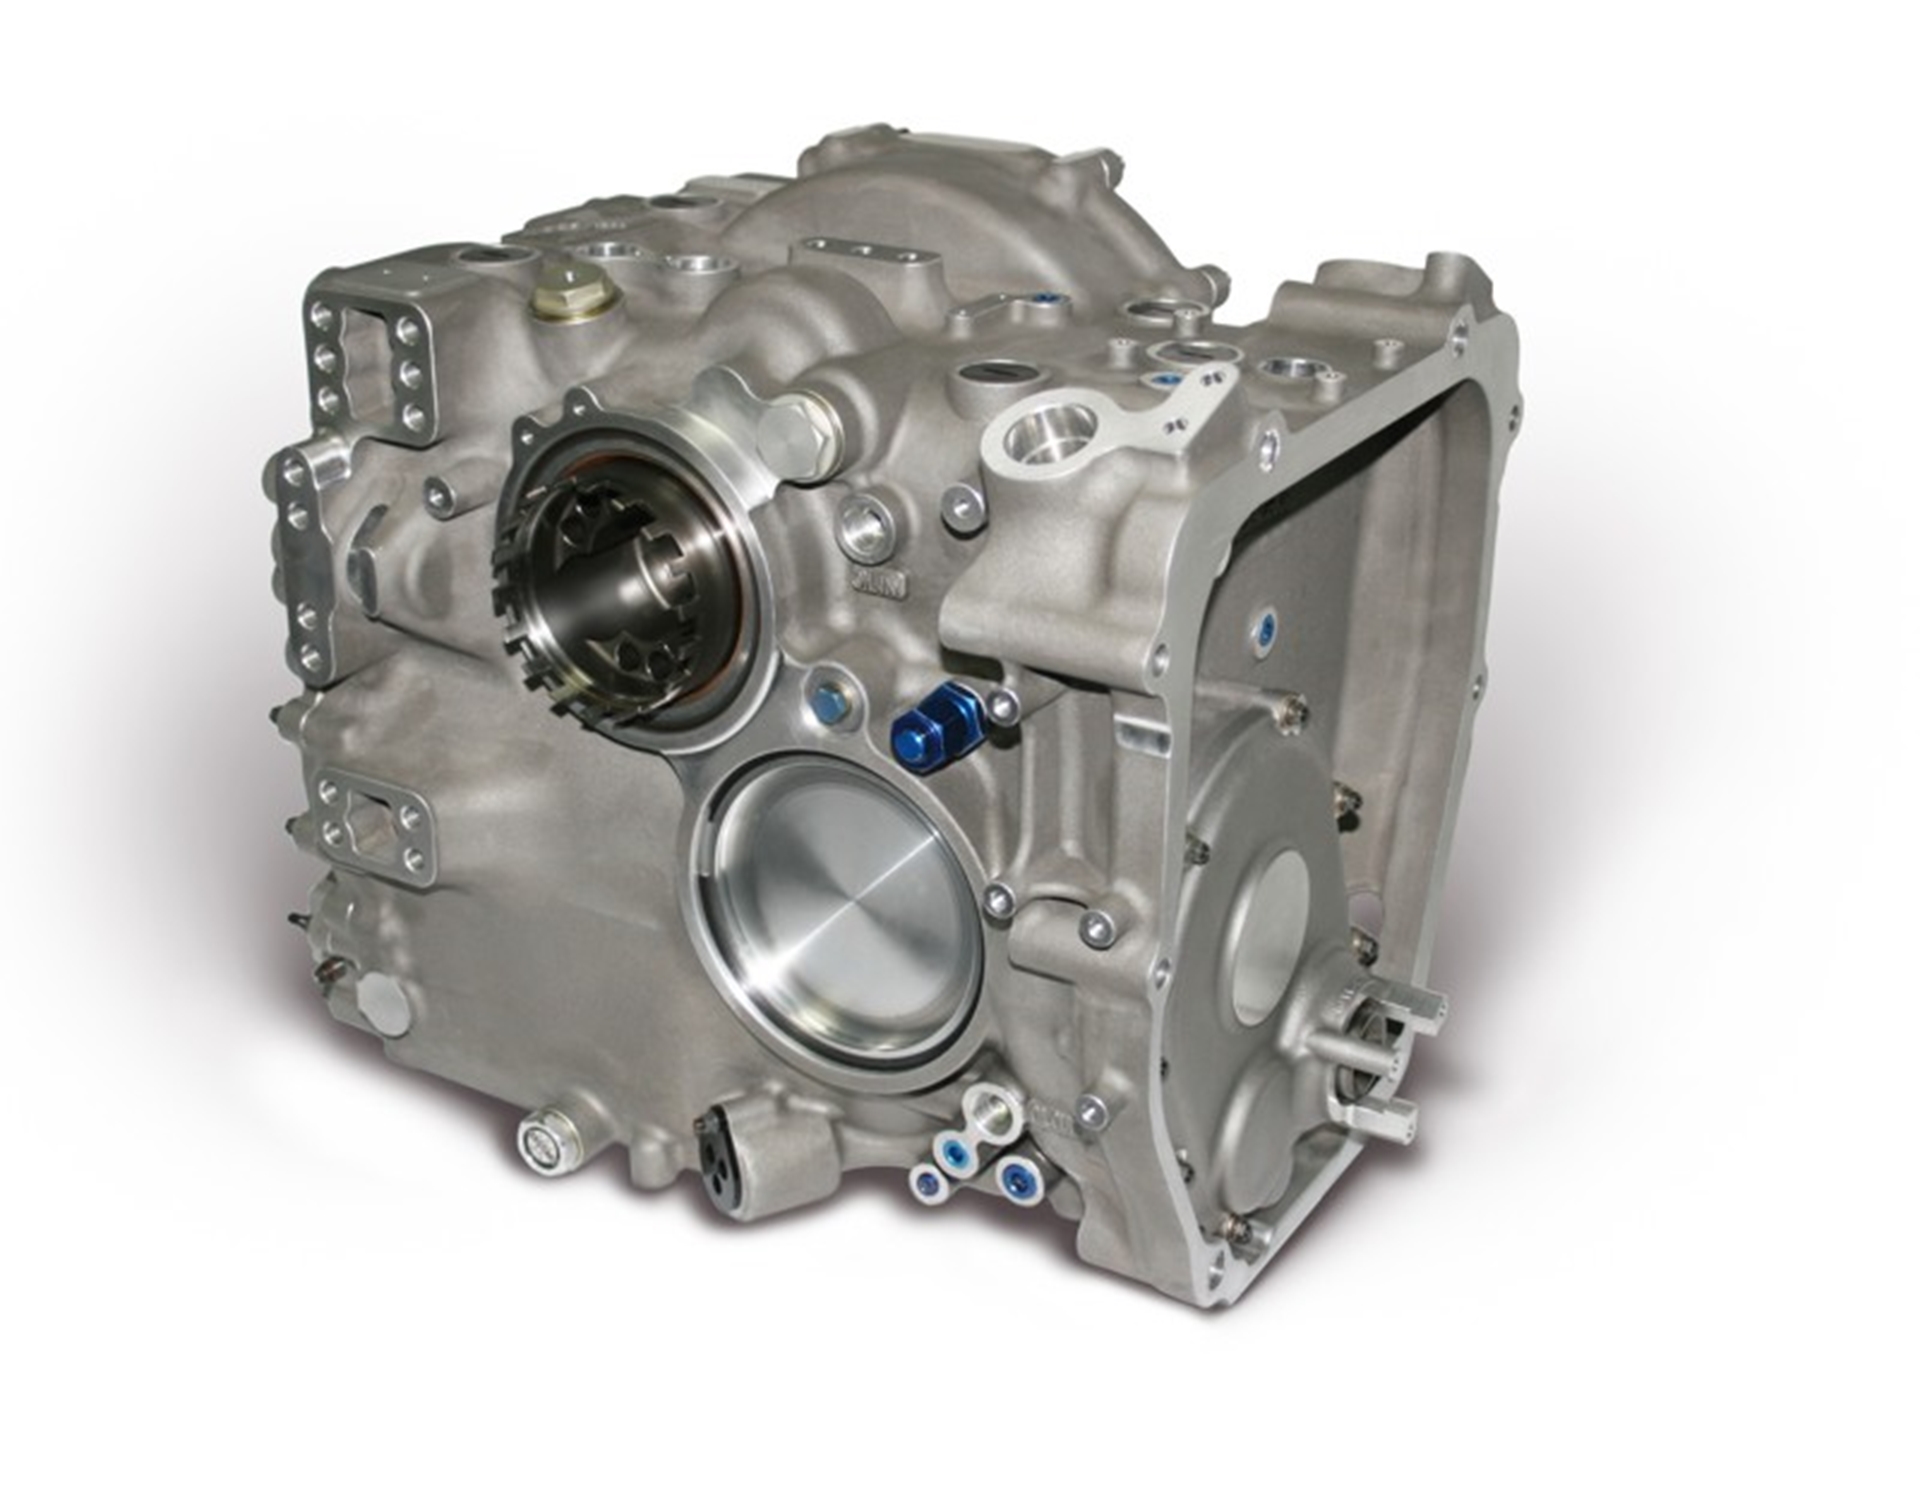 Xtrac 1011 transmission developed for IndyCar race series